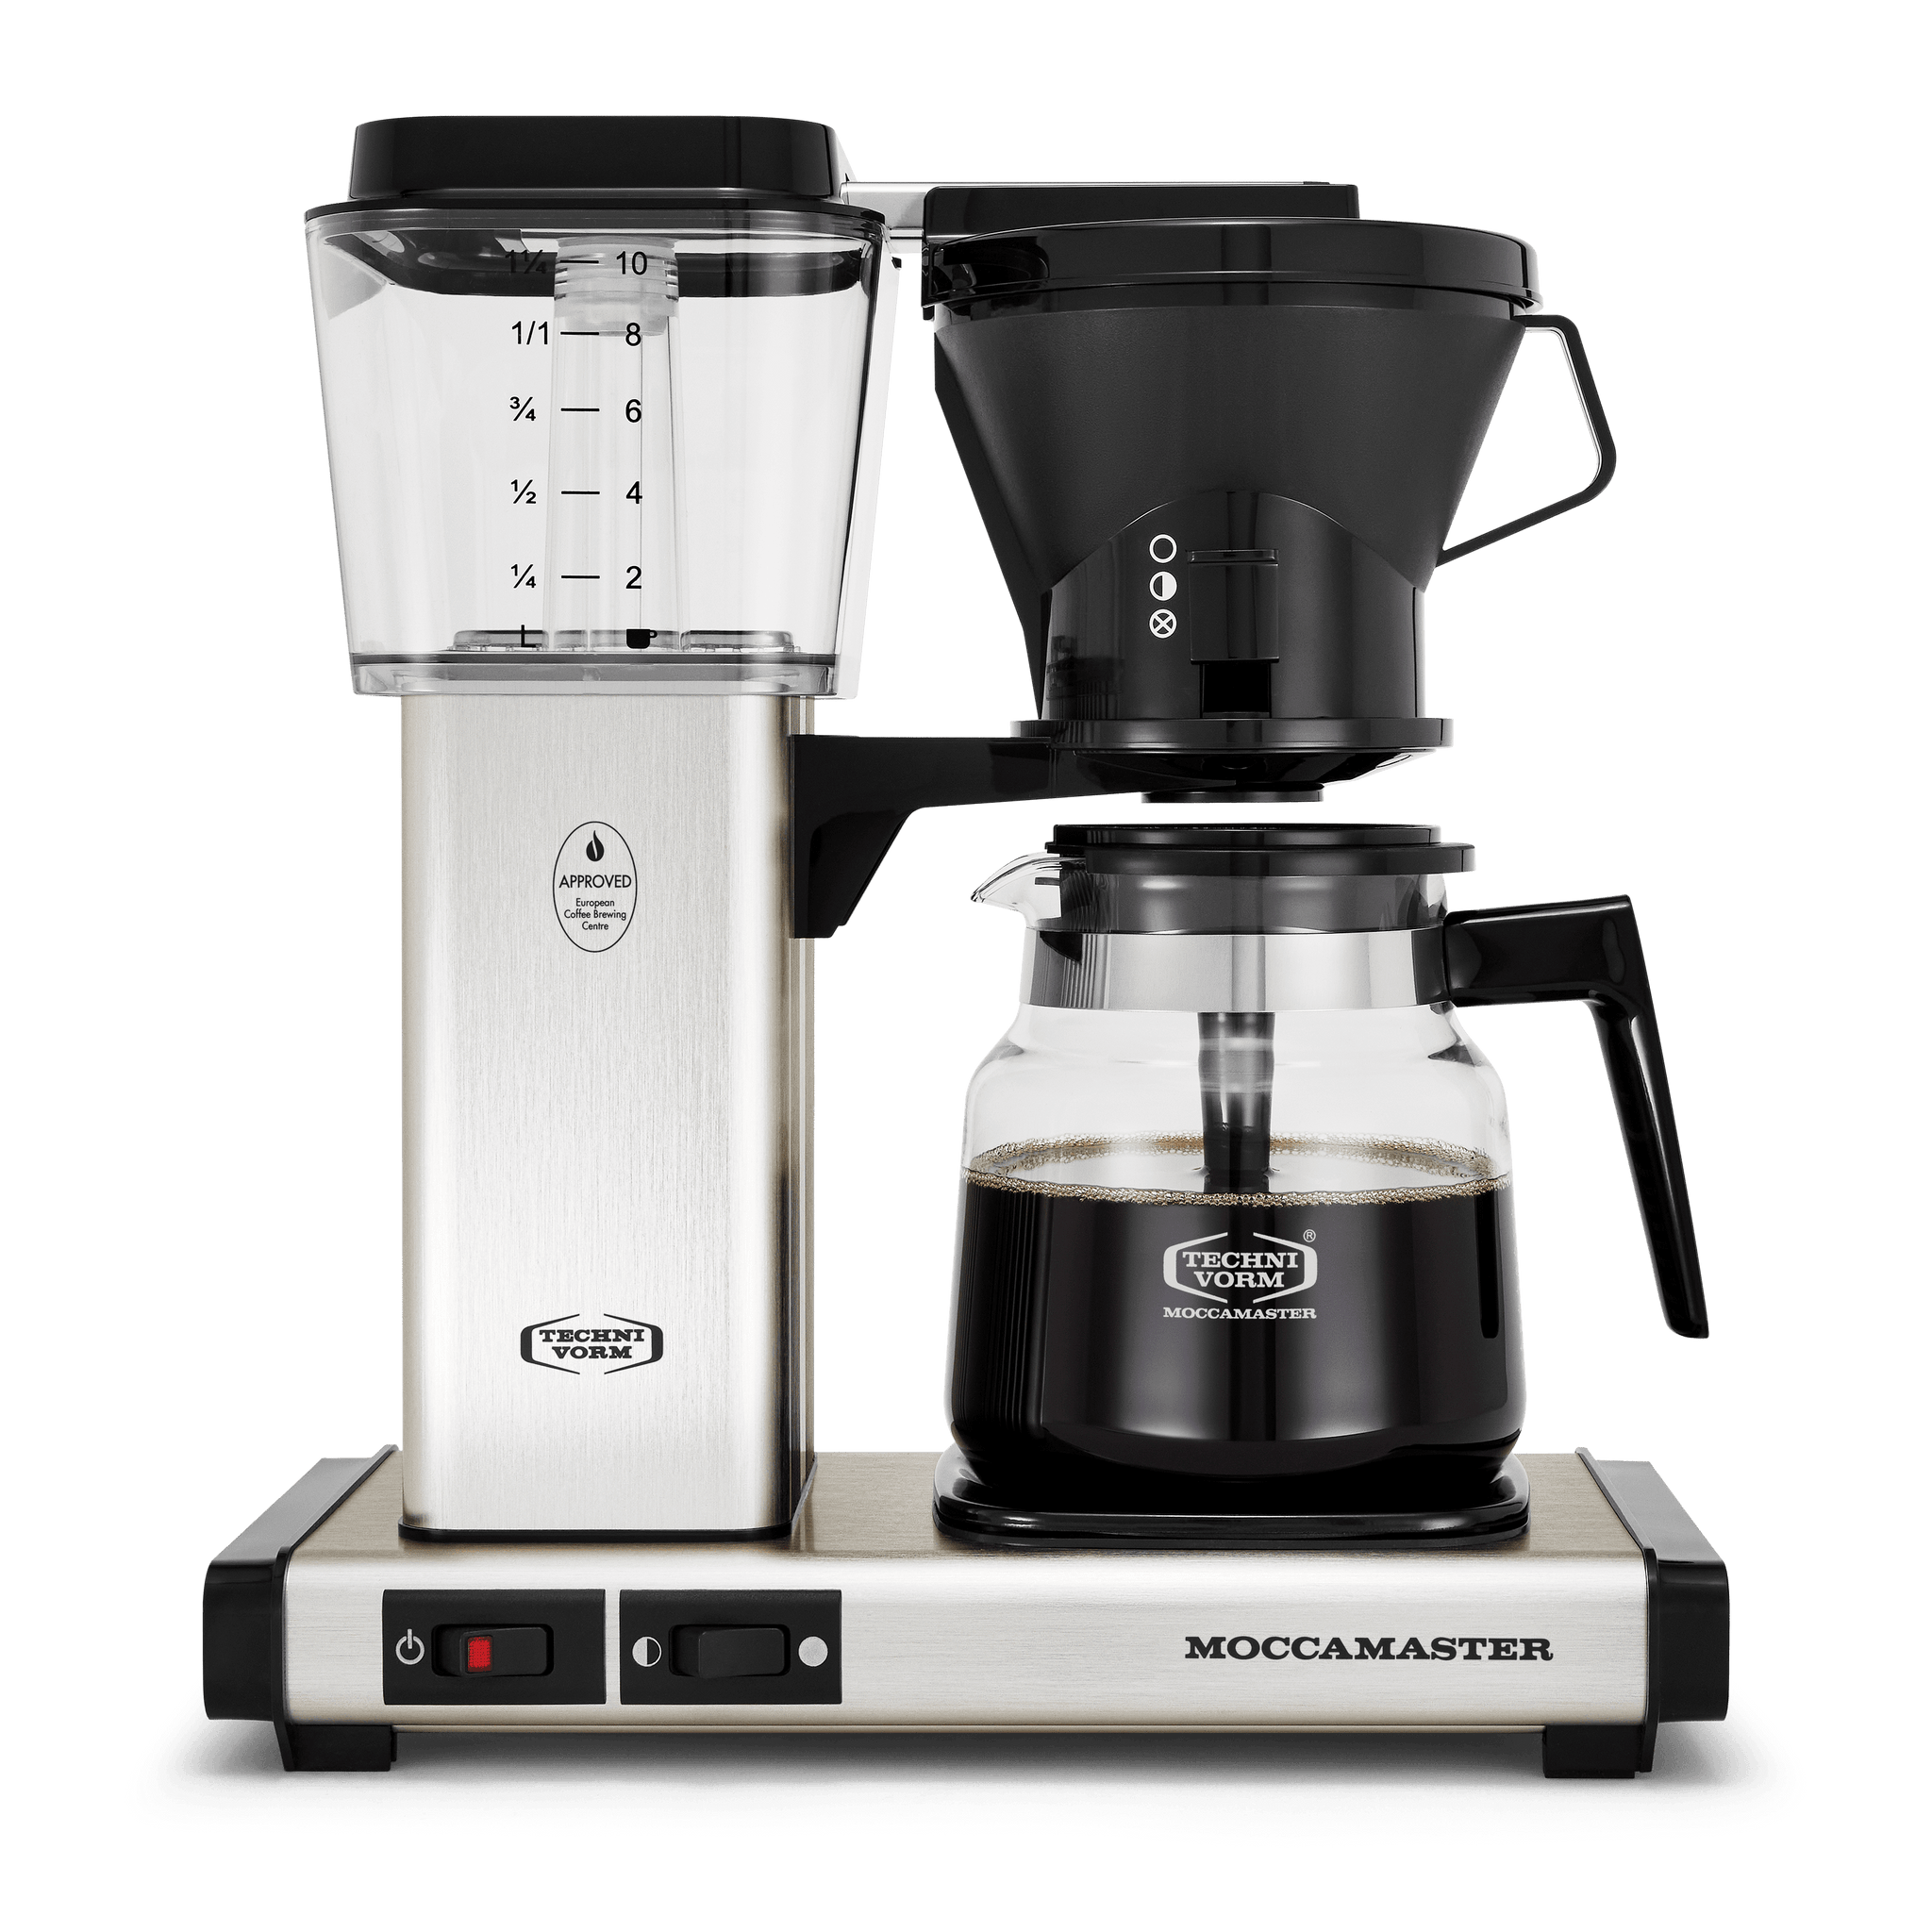 Is there a drip coffee maker with no plastic parts?